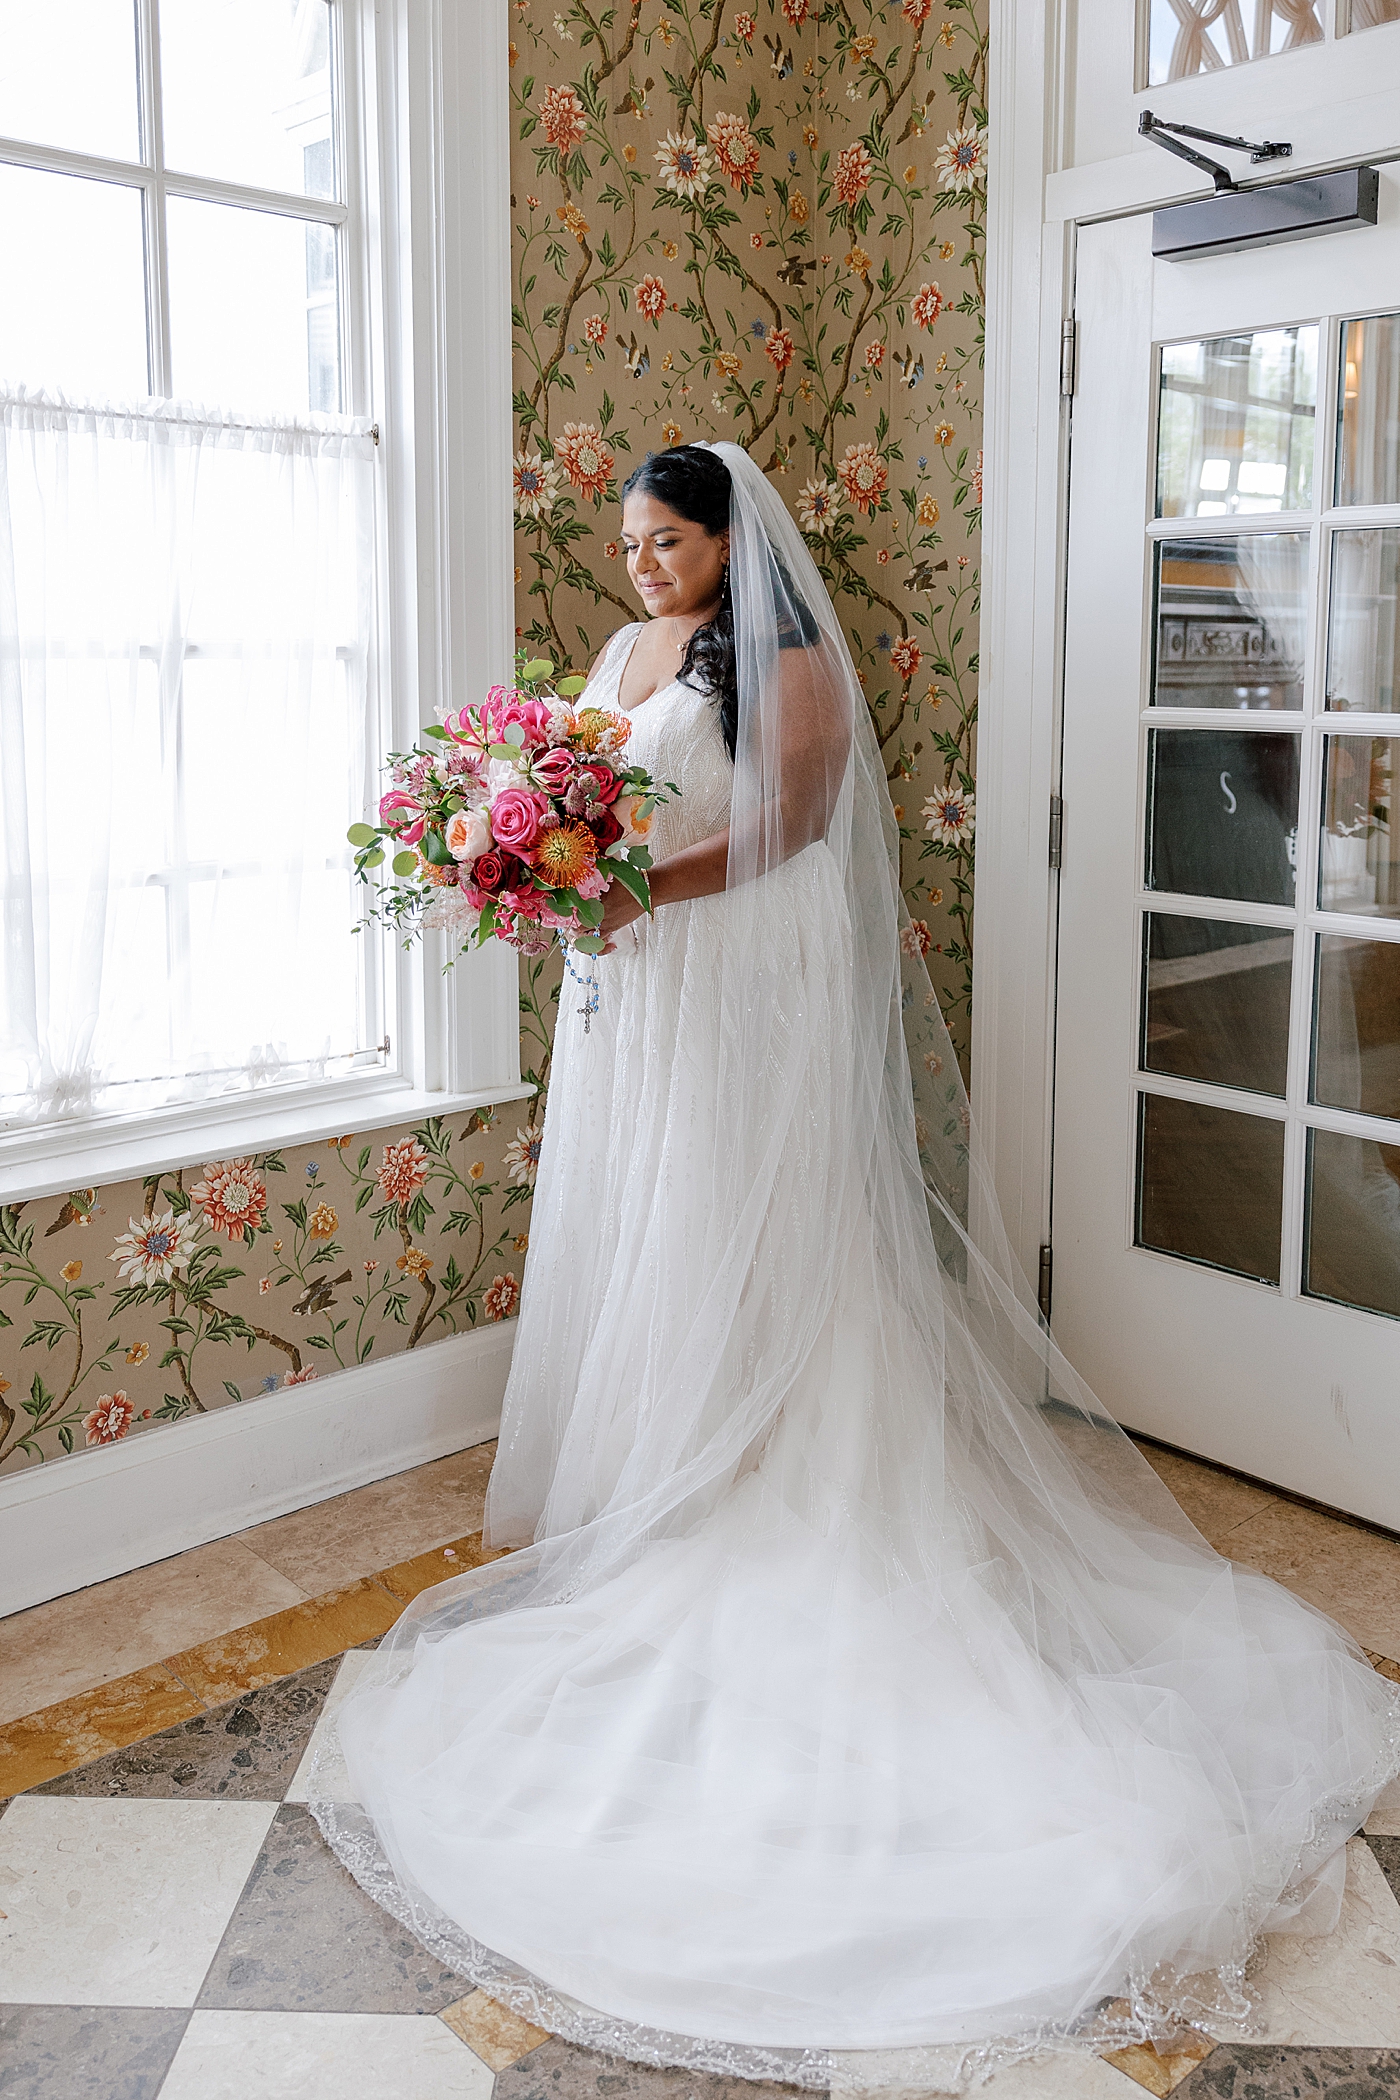 Bride posing indoors with floral wallpaper looking down at her bouquet | Image by Hope Helmuth Photography